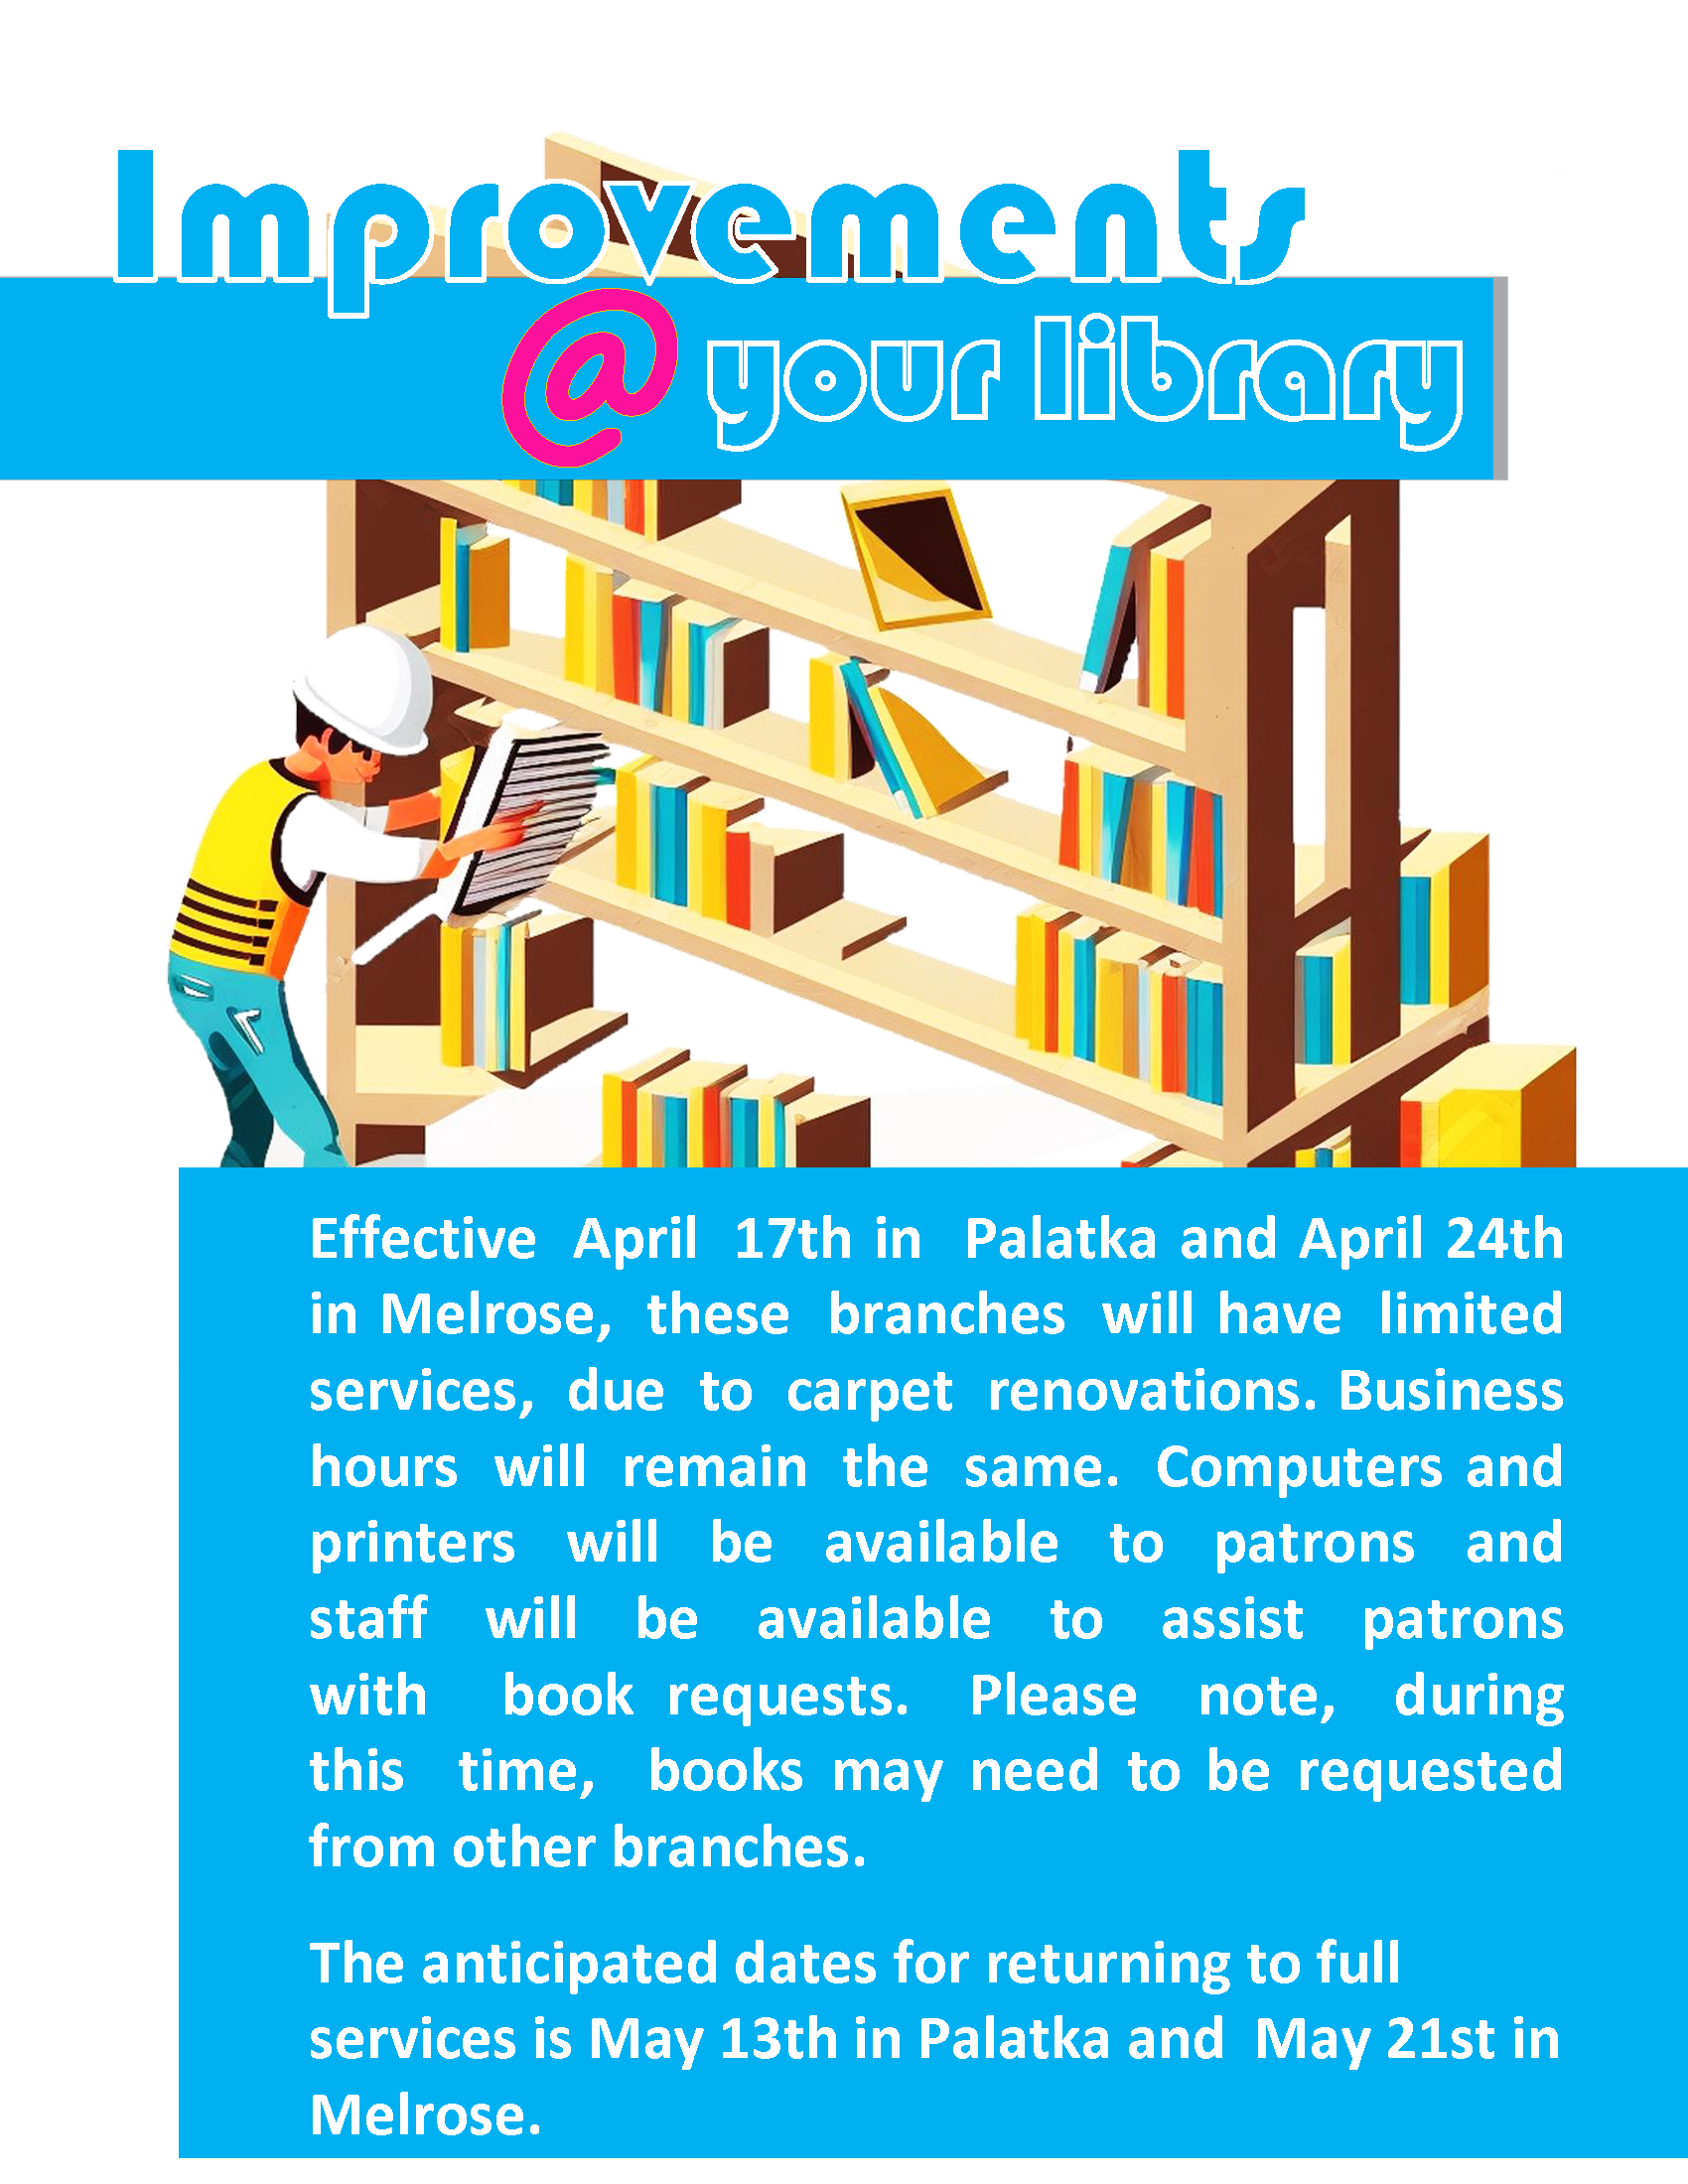 Effective April 17th in Palatka and April 24th in  Melrose, these branches will have limited services, due to carpet renovations. Business hours will remain the same. Computers and printers will be available to patrons and staff will be available to assist with book requests. Please note, during this time, books may need to be requested from other branches. The anticipated dates for returning to full services is May 13th for Palatka and May 21st for Melrose.